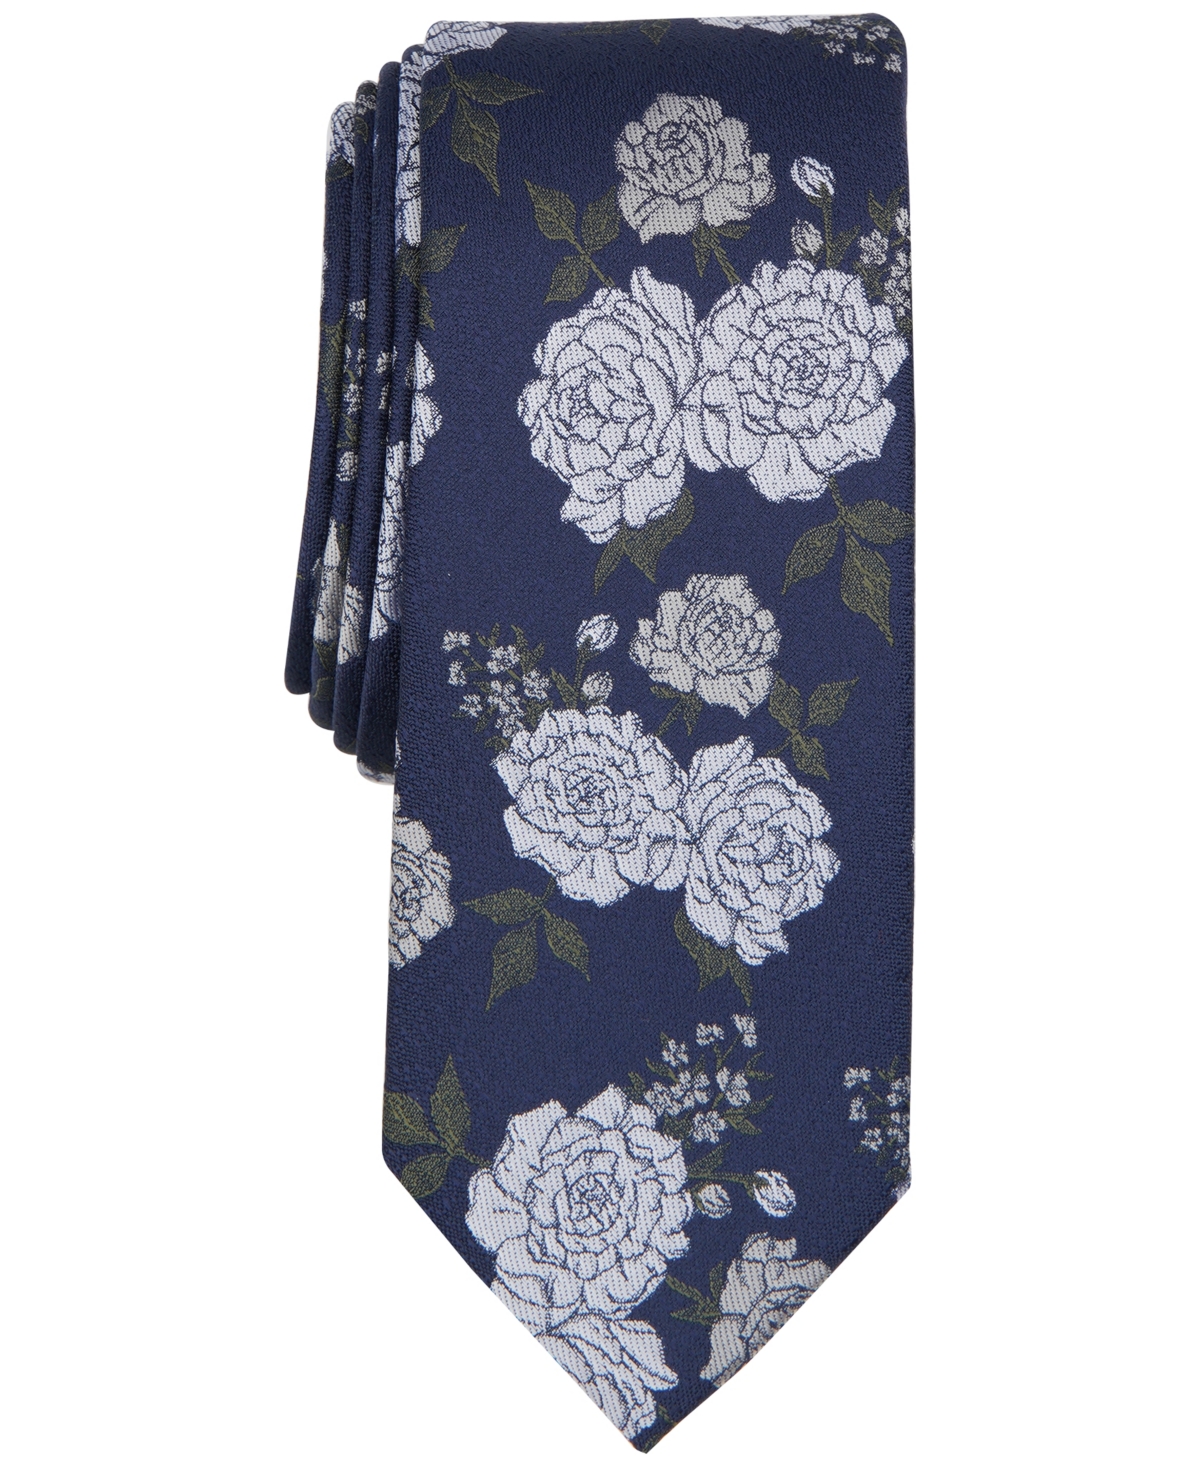 Men's Shiloh Floral Tie, Created for Macy's - Silver